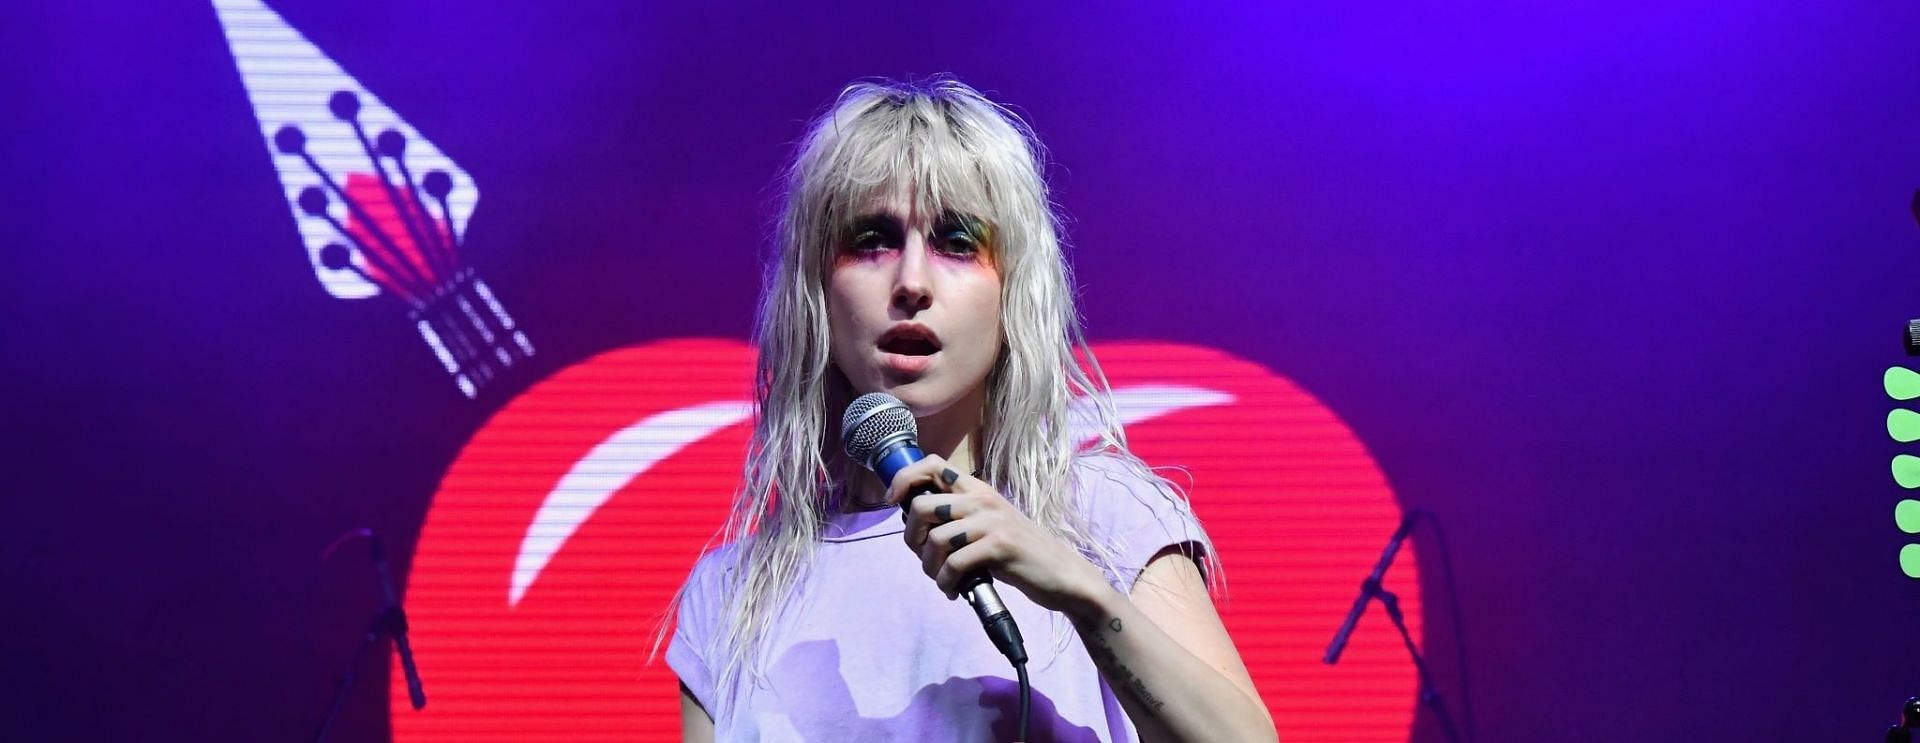 Hayley Williams issued lengthy public apology over GDY controversy (Image via Getty Images/Jeff Kravitz)